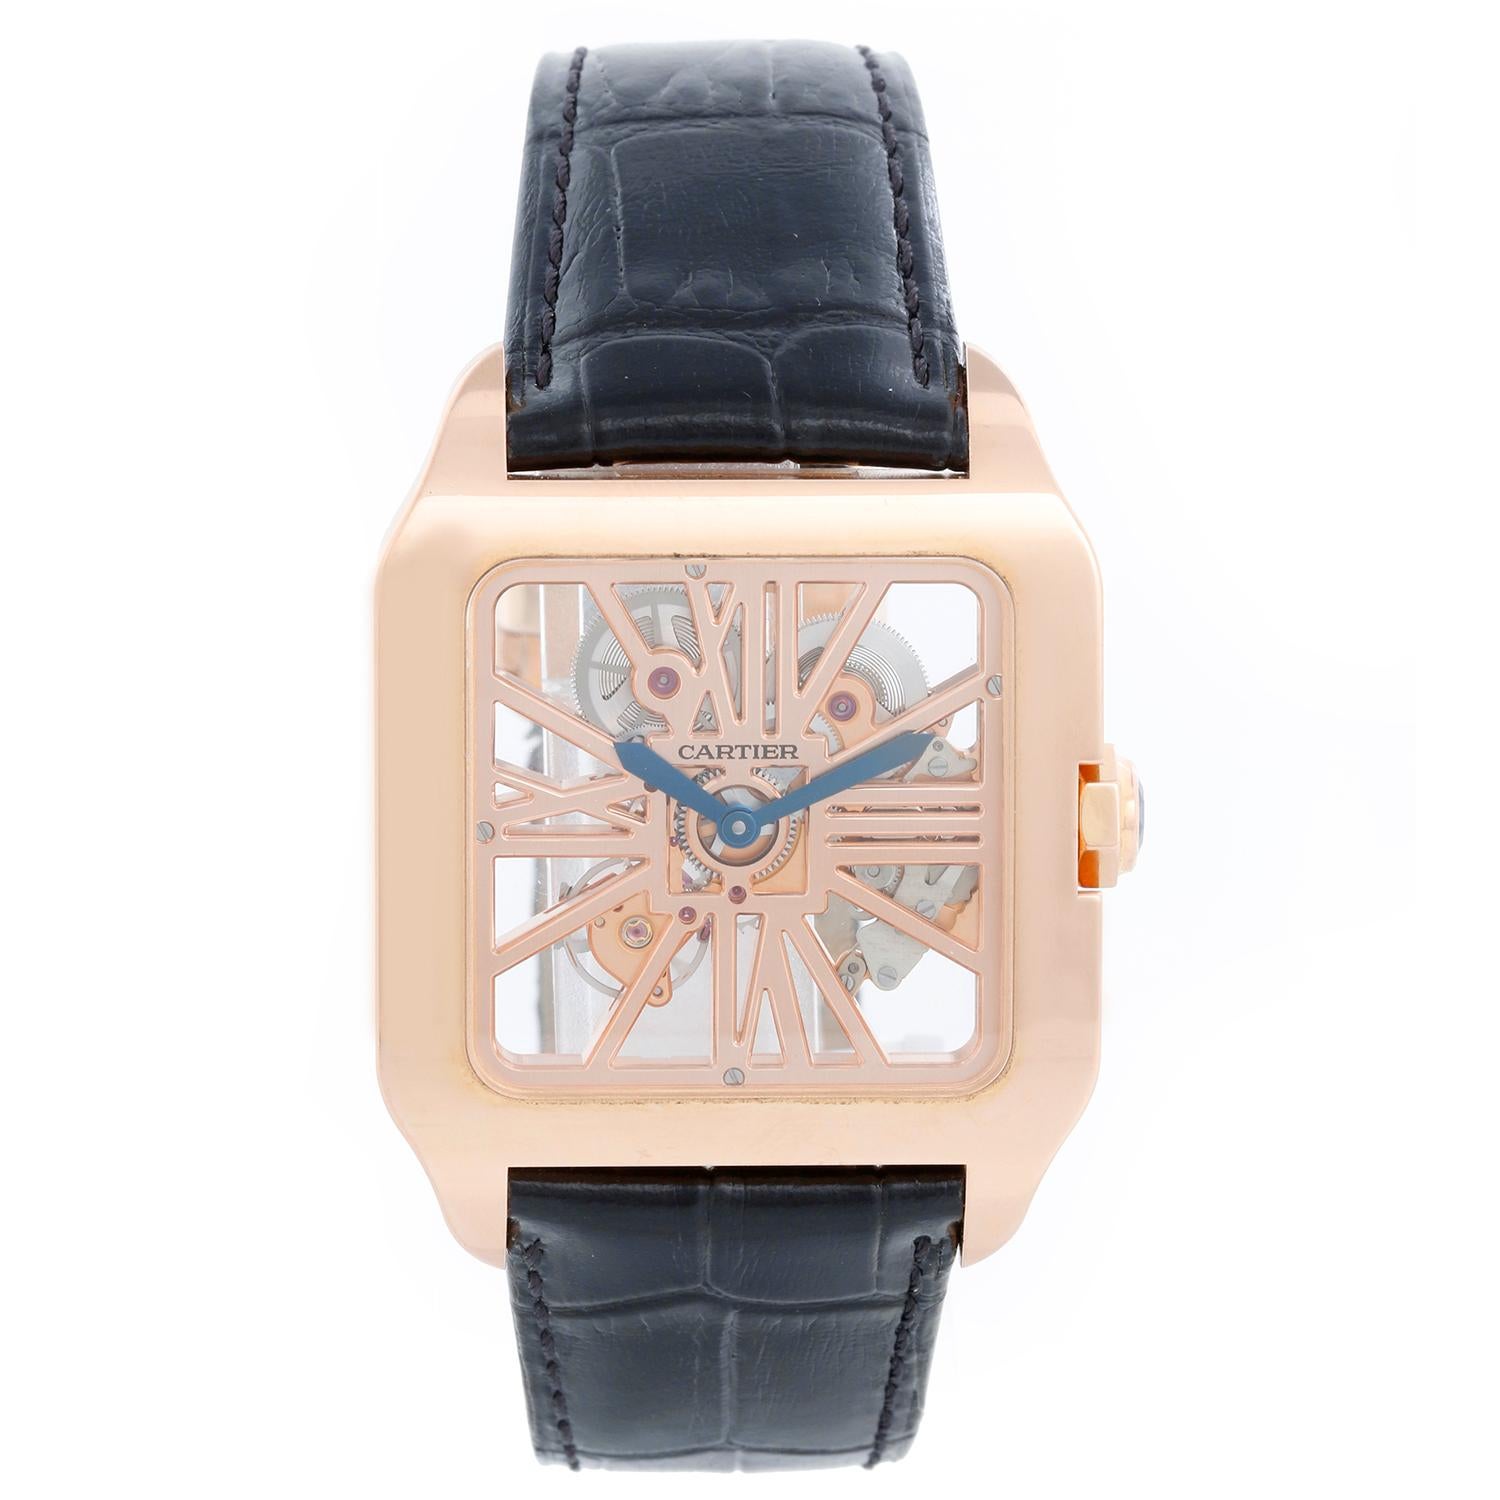 Cartier Santos Dumont XL Skeleton Rose Gold Watch W2020057 - Manual. 18K Rose Gold with sapphire crown ( 38 mm x 47 mm ). Skeleton complication of bridges in the form of Roman numerals. Black Cartier bracelet with Cartier gold deployant clasp.